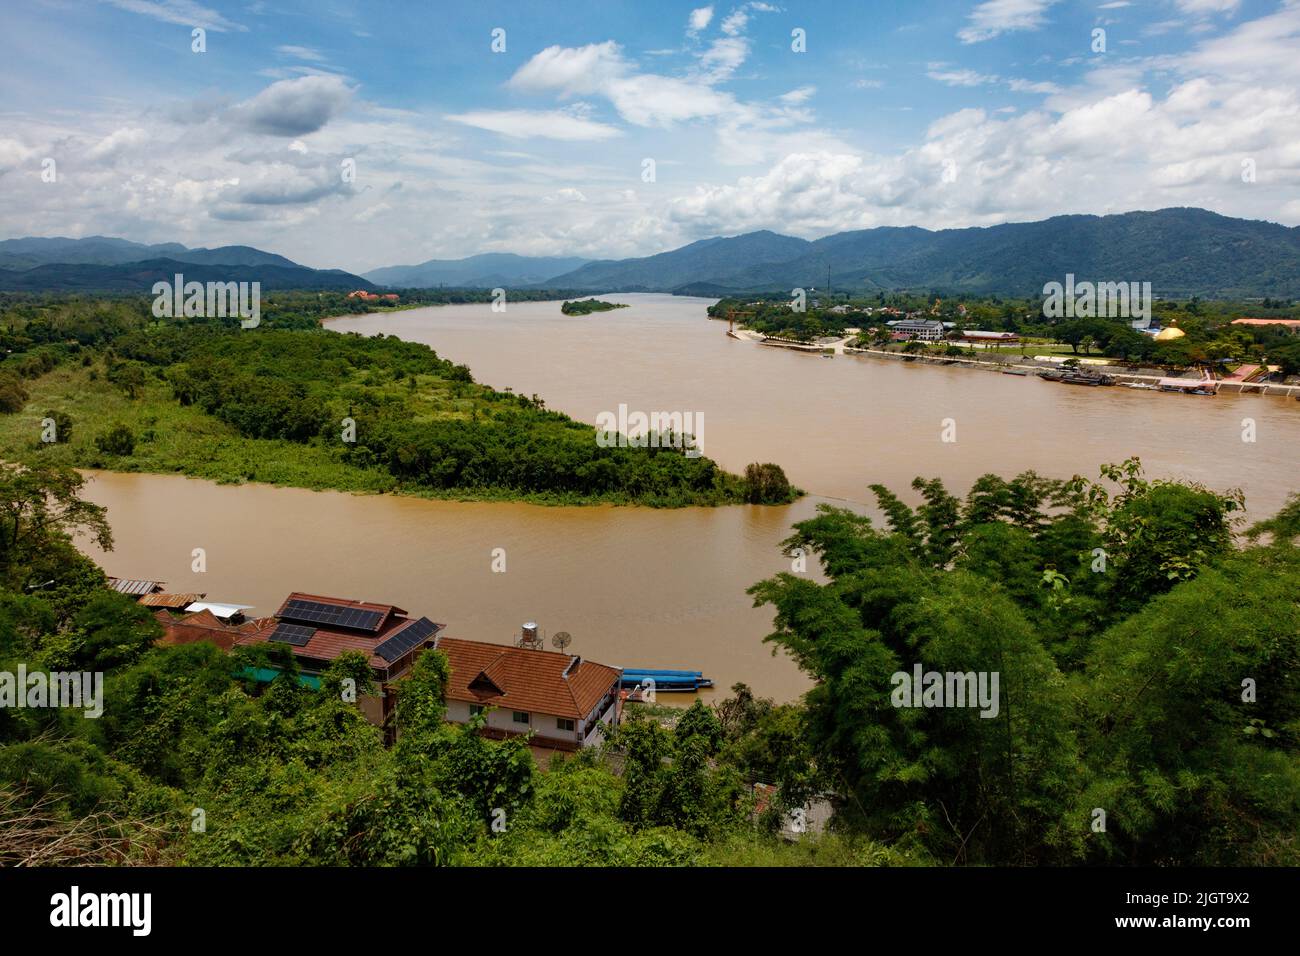 The GOLDEN TRIANGLE is where Thailand, Burma and Laos meet at the confluence of the Mekong and Ruak rivers - CHIANG   SAEN, THAILAND Stock Photo